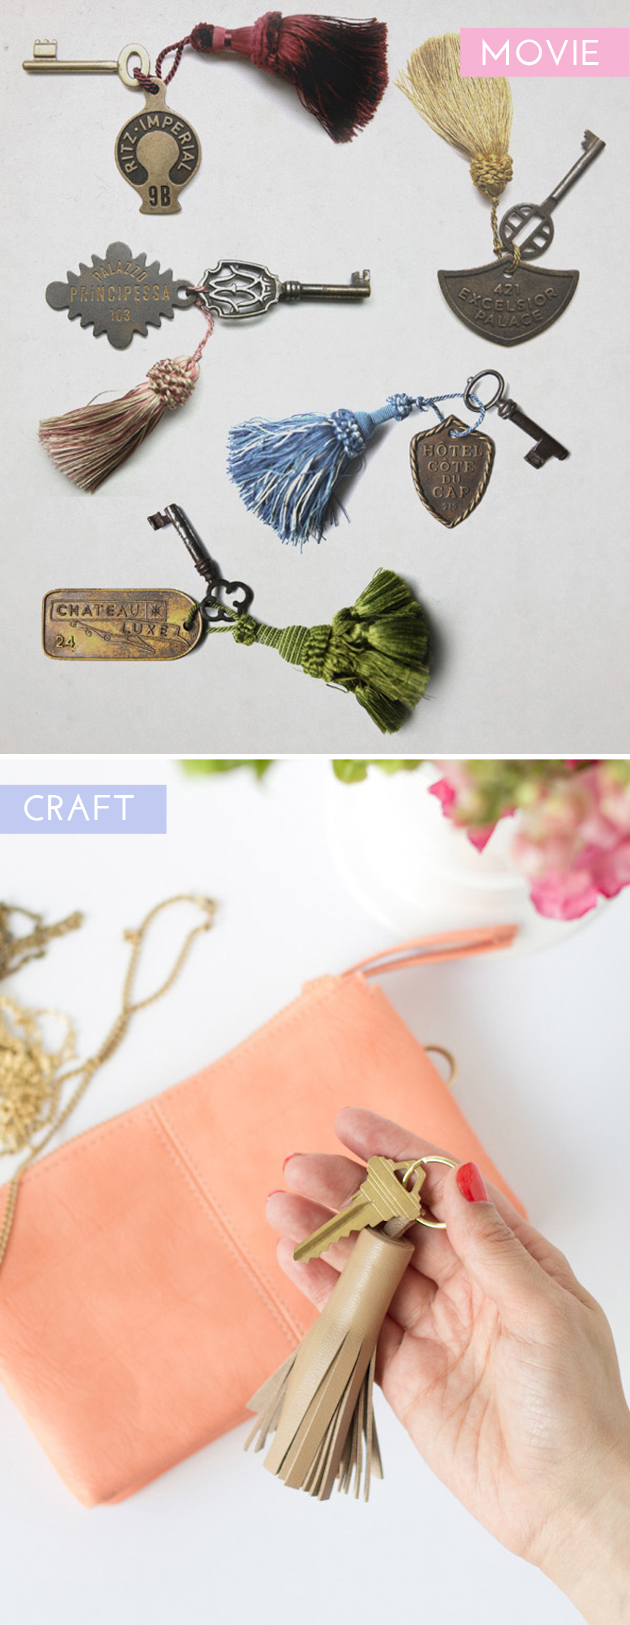 Movie Inspired Crafts: The Grand Budapest Hotel